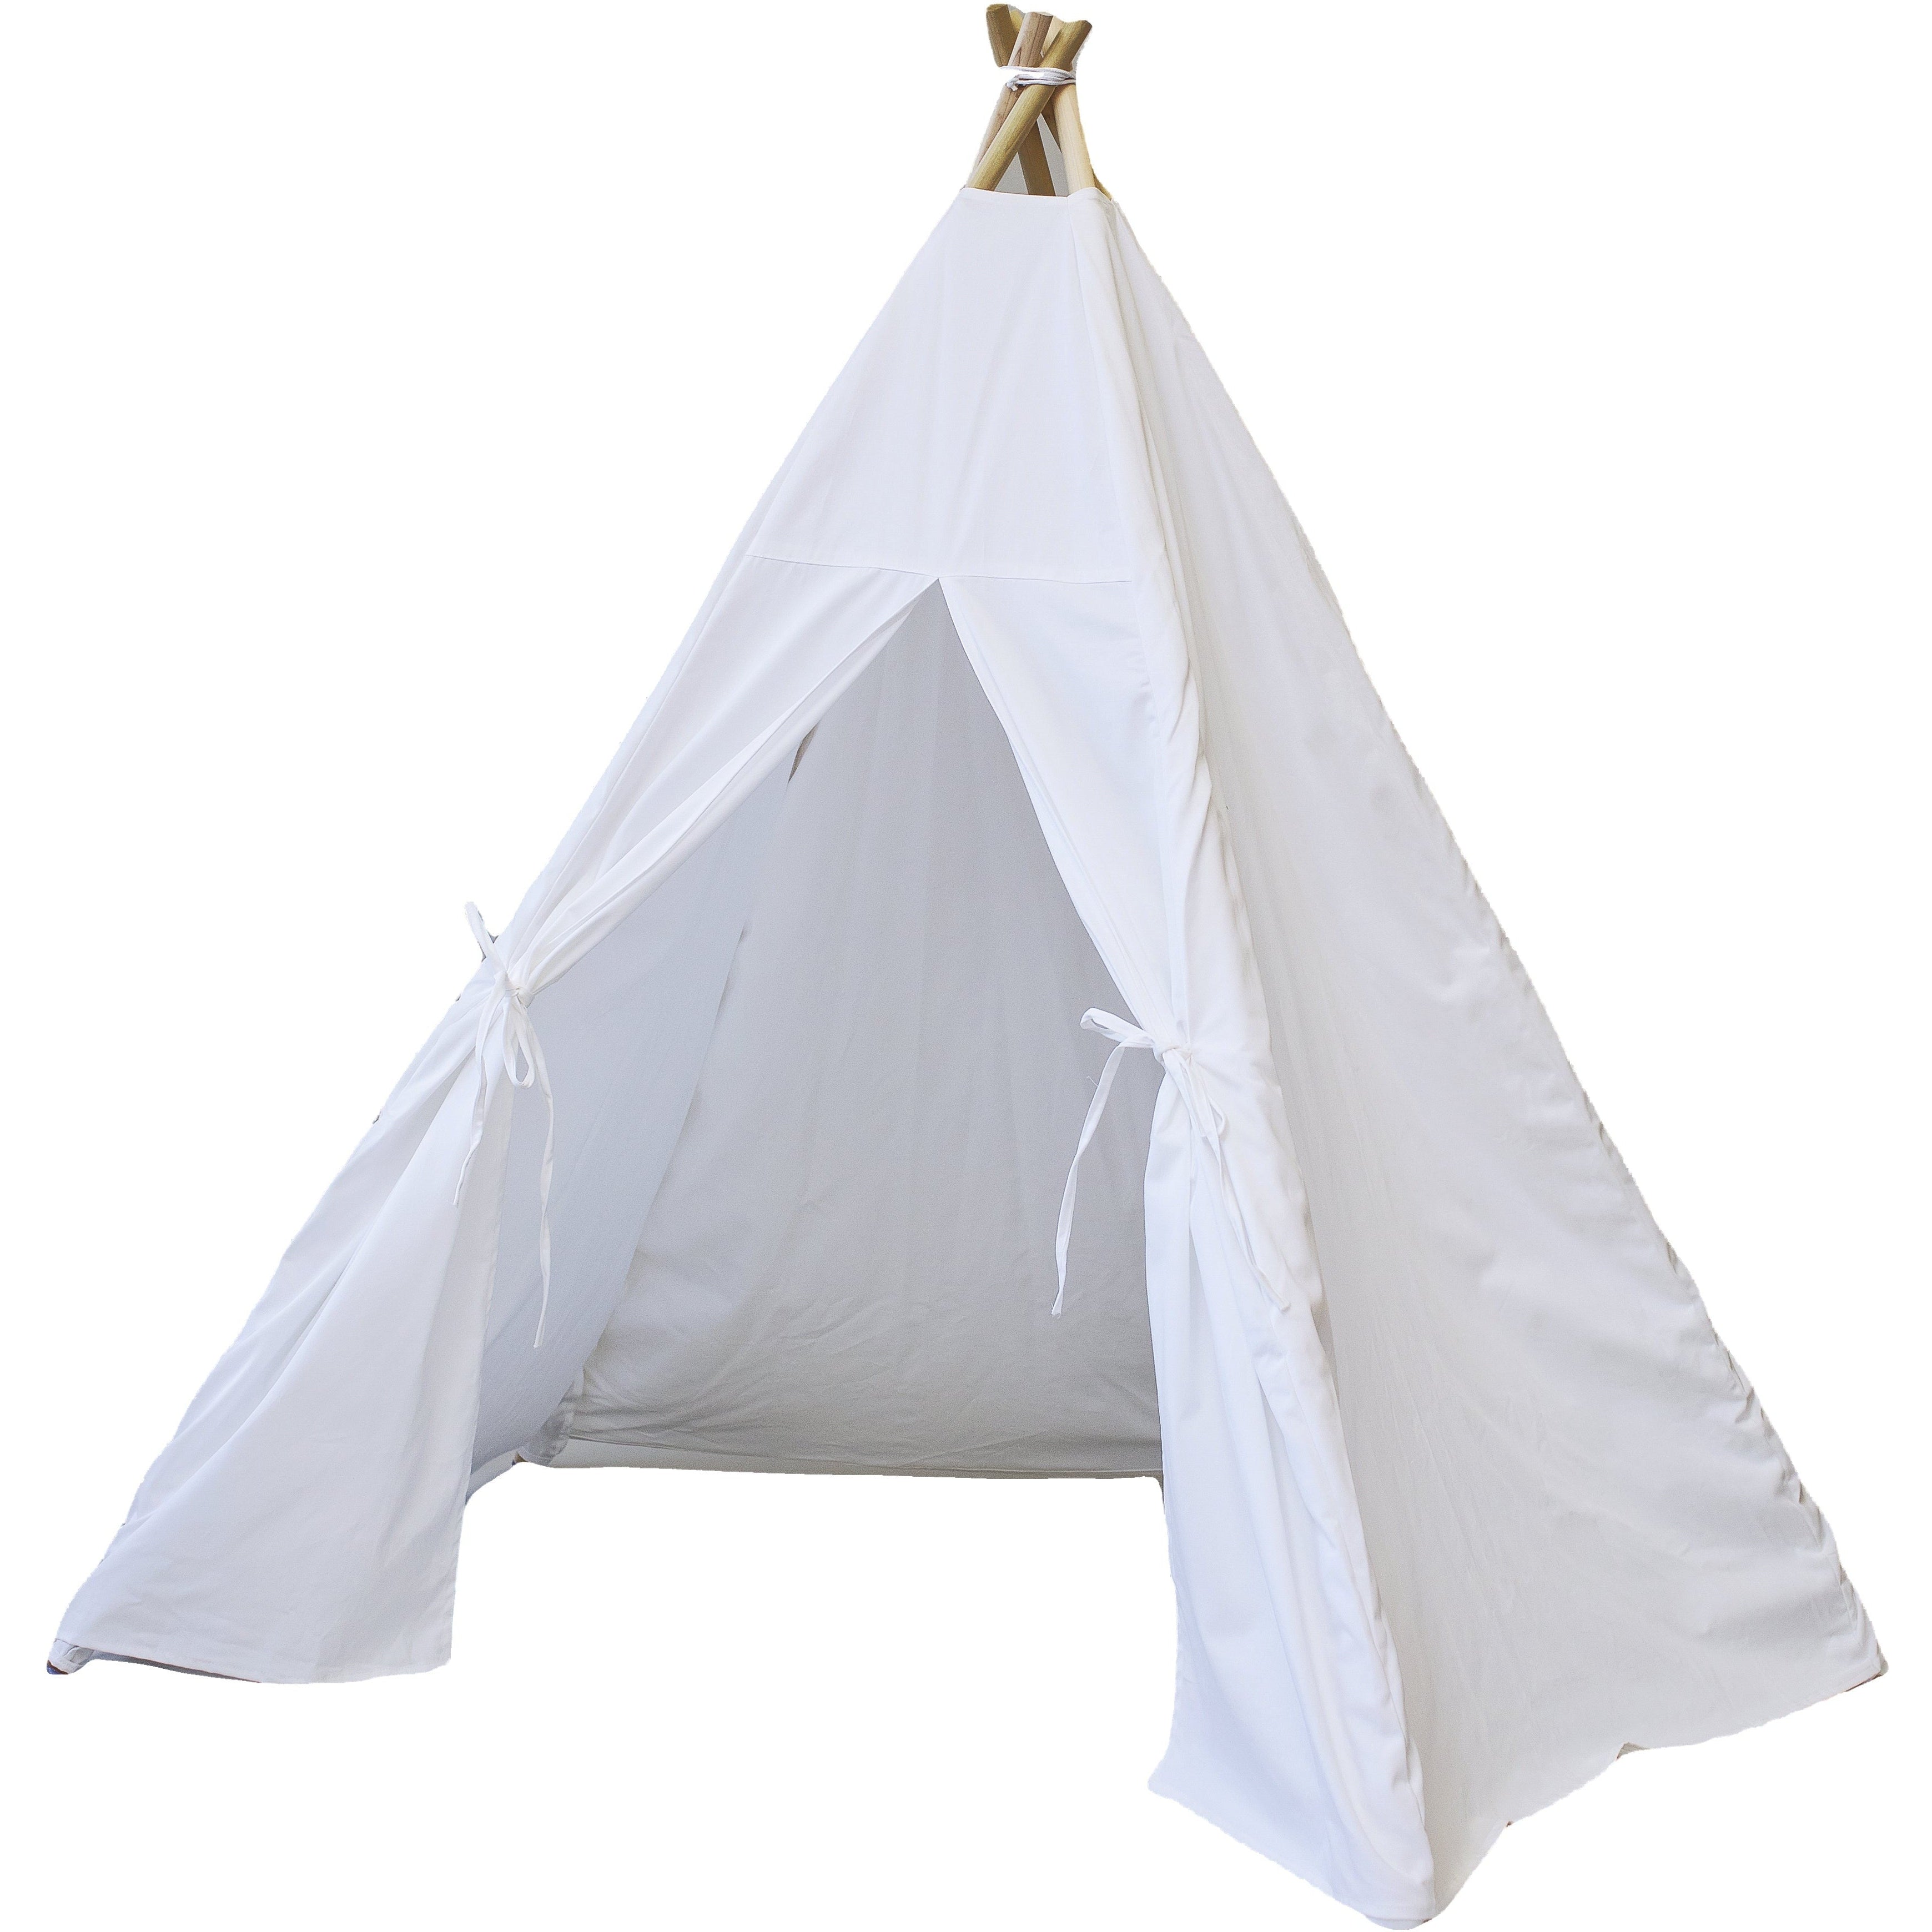 The 5 Sided Beckett Play Tent